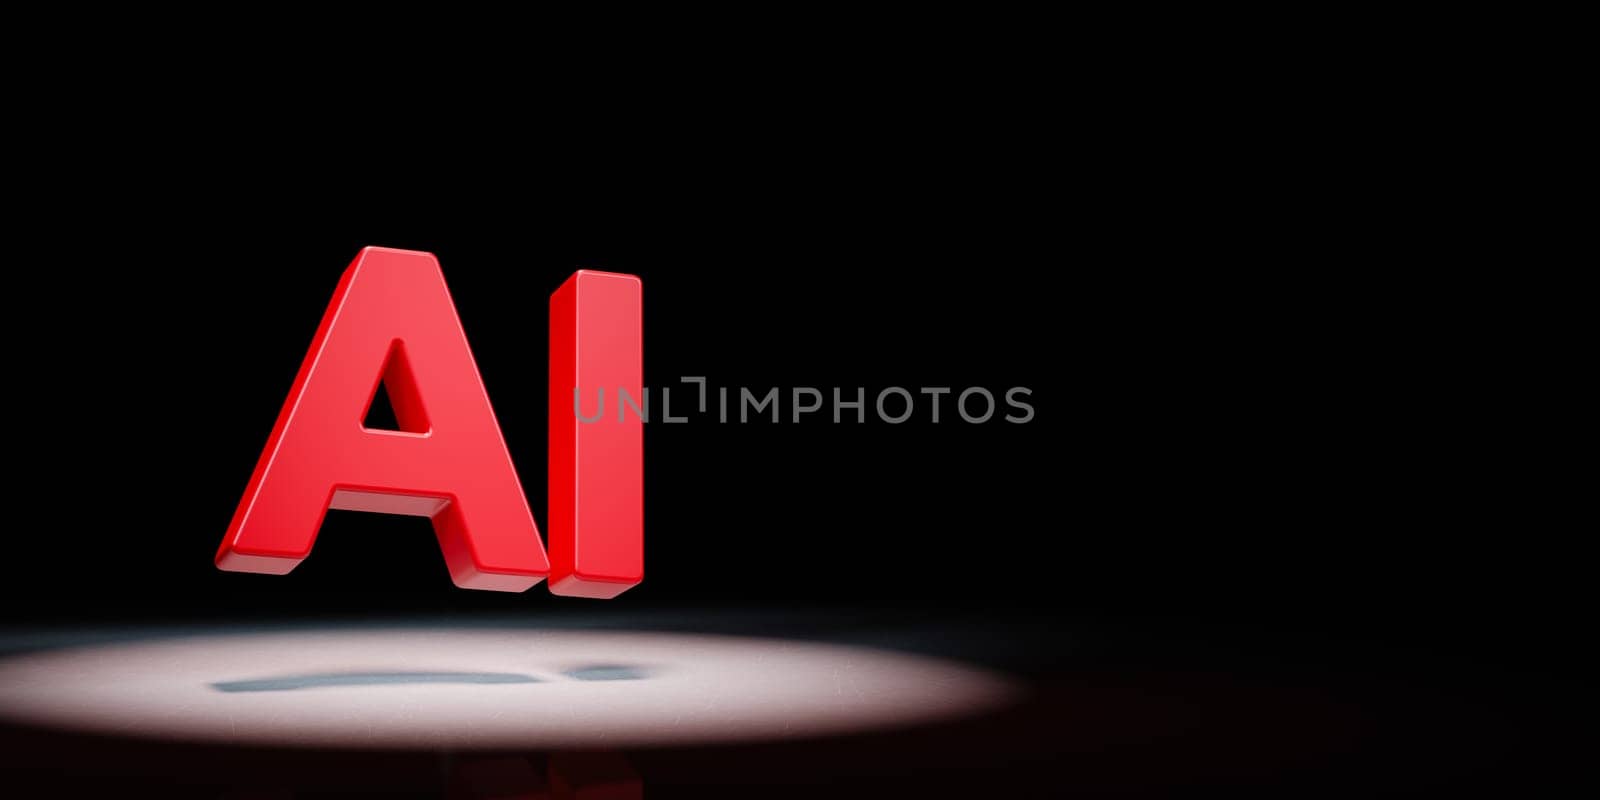 AI 3D Text Spotlighted on Black Background by make